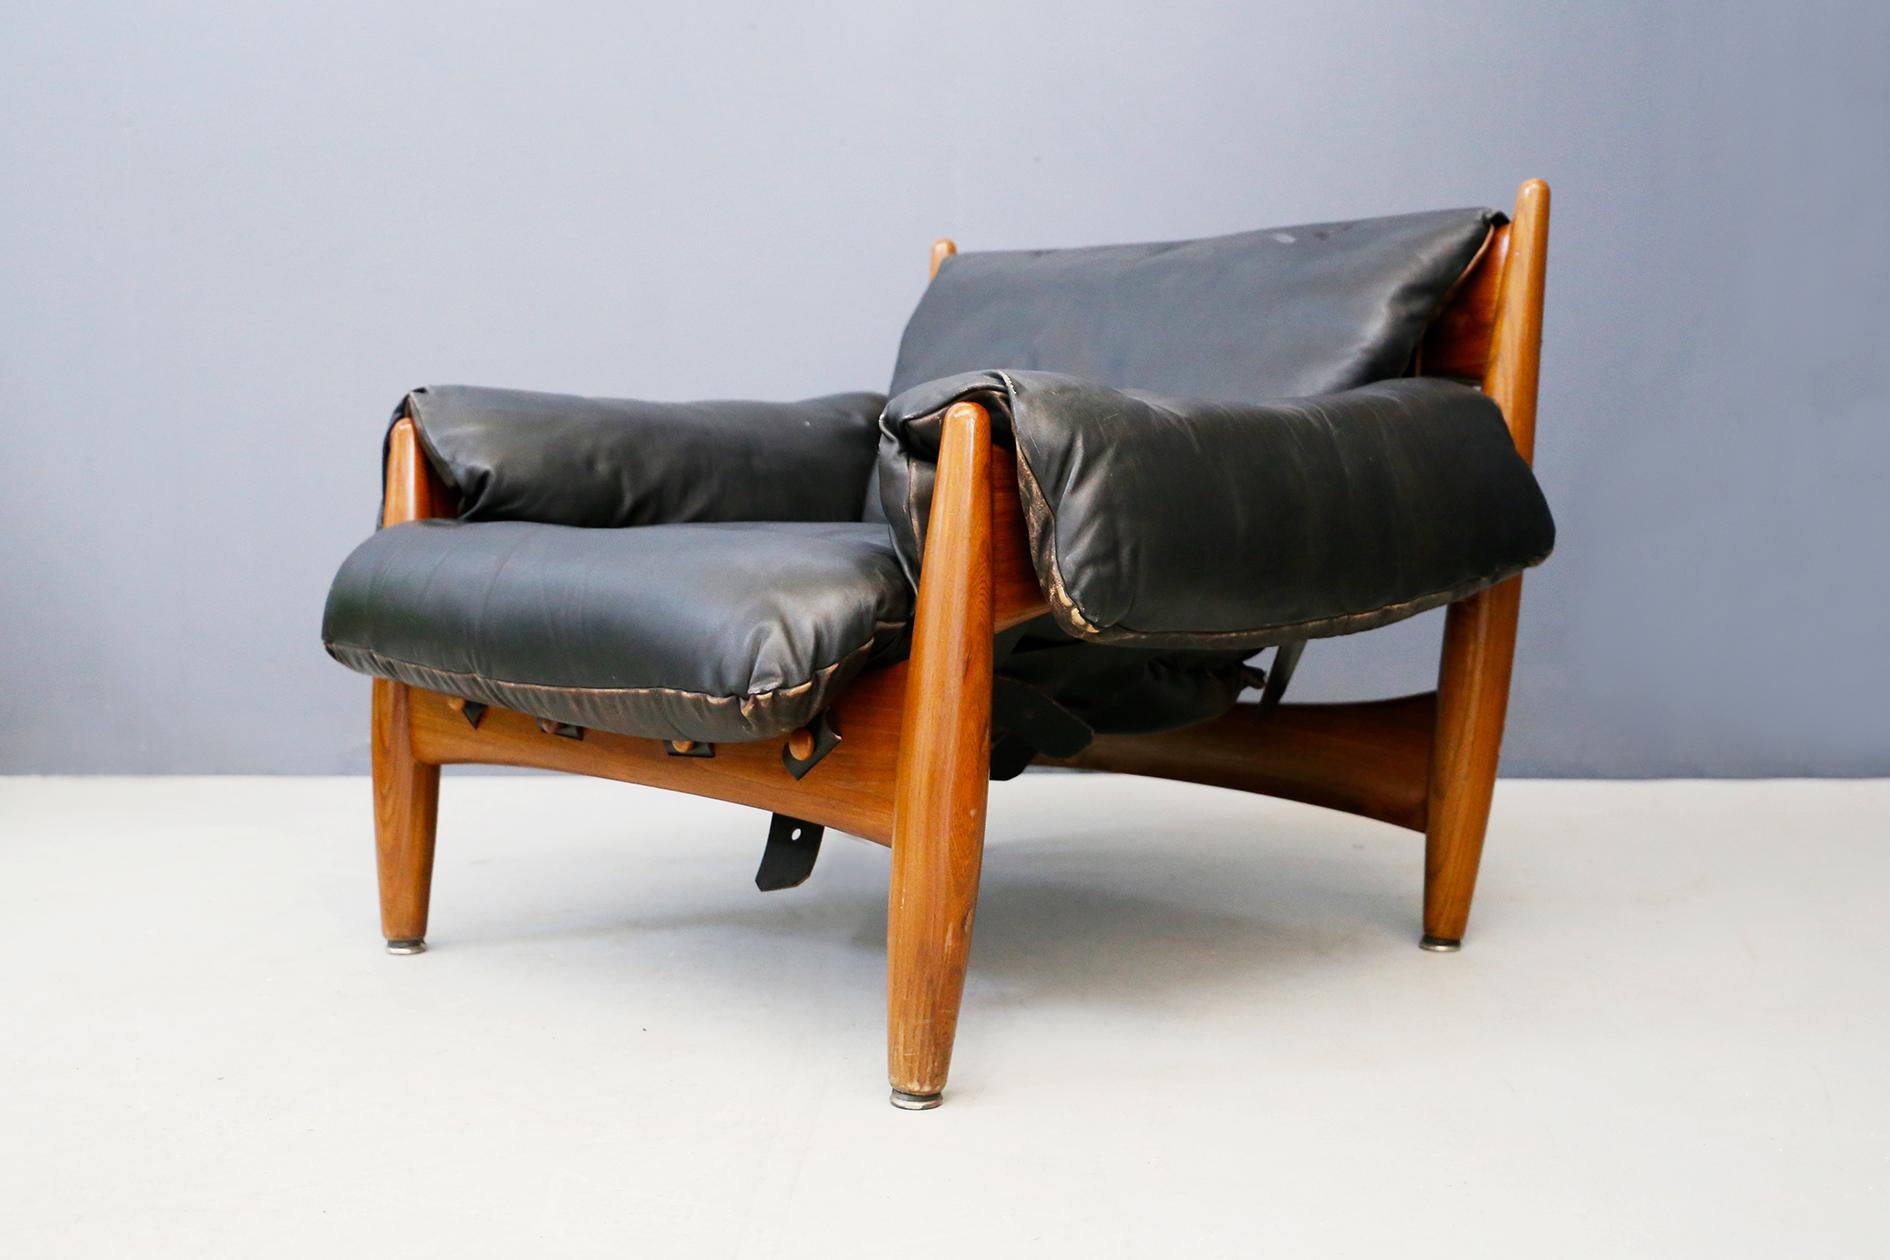 Large and comfortable Lounge chair with Ottoman by Sergio Rodrigues for the manufacture of Isa Bergamo under the name MOLE chair or Sheriff. Designed in 1957, the chair won first prize at the IV International Furniture Competition in 1961.